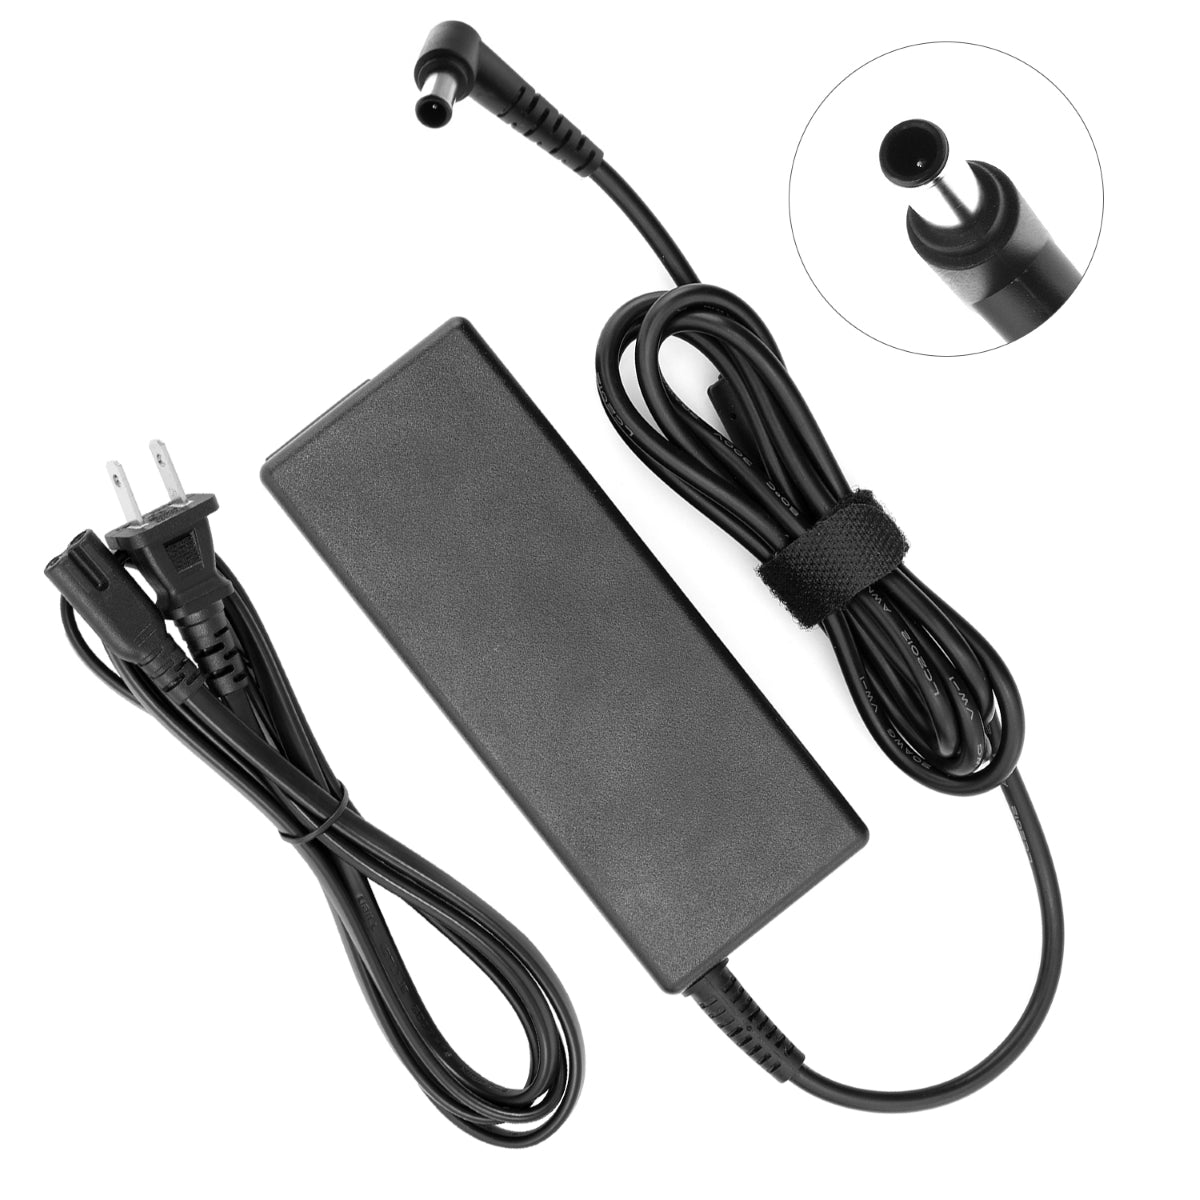 AC Adapter for LG 20EN33SS Monitor